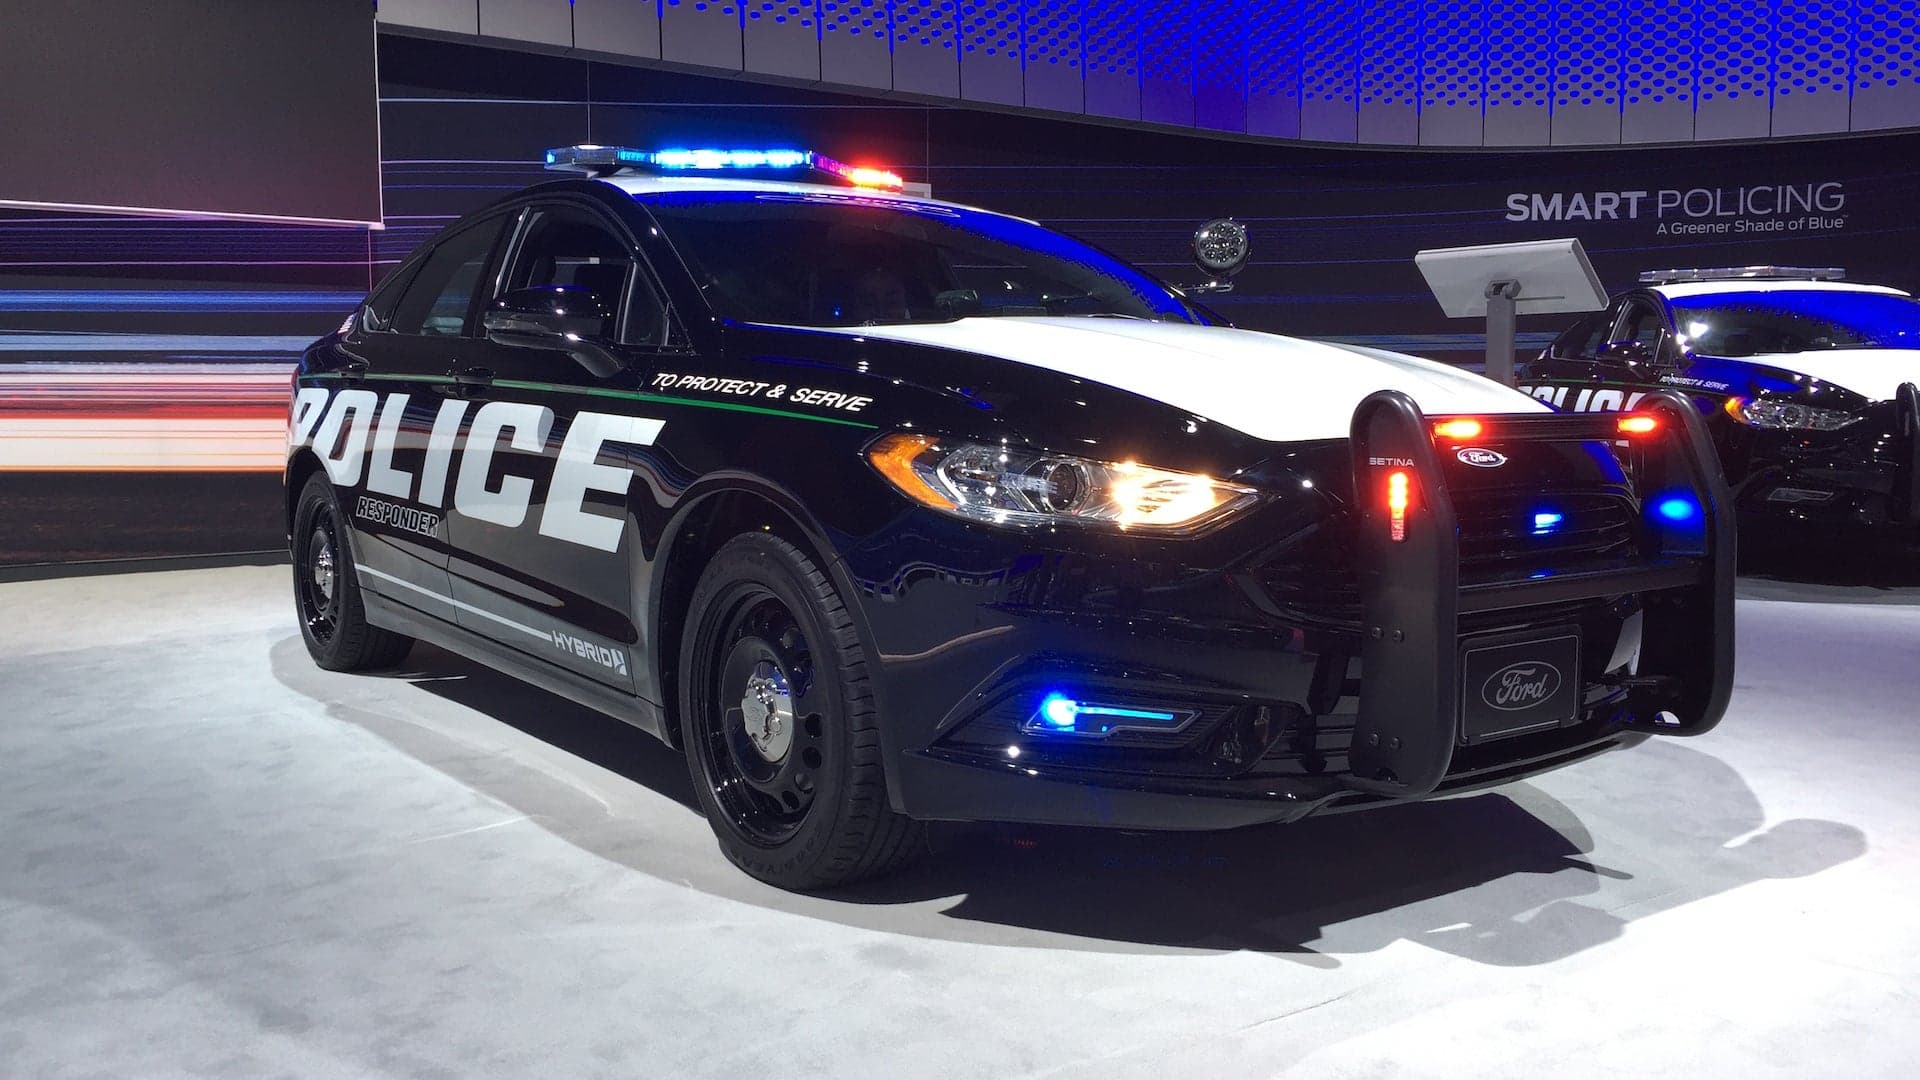 Why Ford’s New Hybrid Police Car Is a “Responder” and Not an “Interceptor”